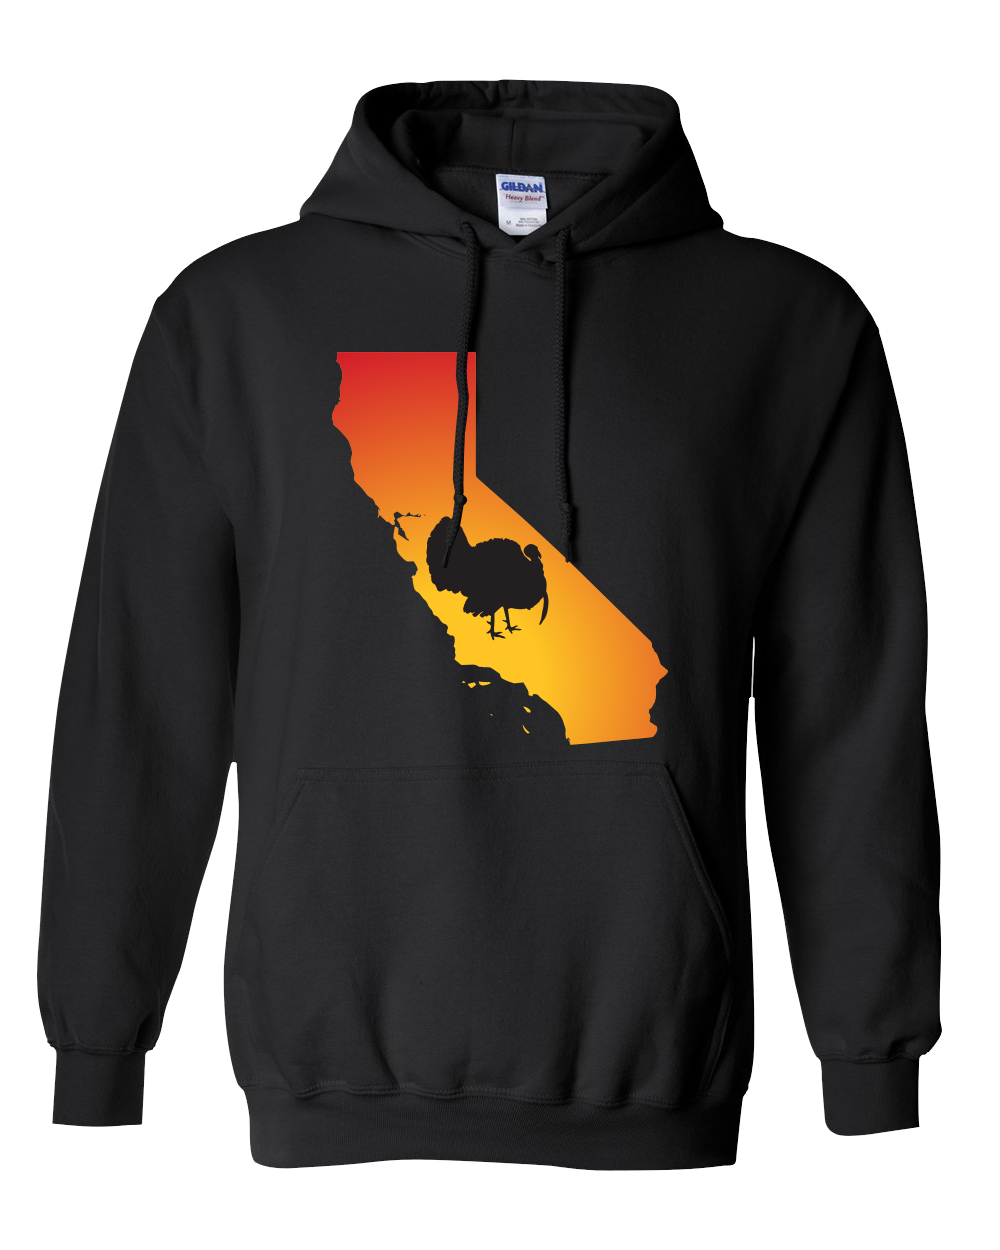 Pullover Hooded Sweatshirt California Black Turkey Vibrant Design High Quality Tight Knit Ring Spun Low Maintenance Cotton Printed With The Newest Available Color Transfer Technology